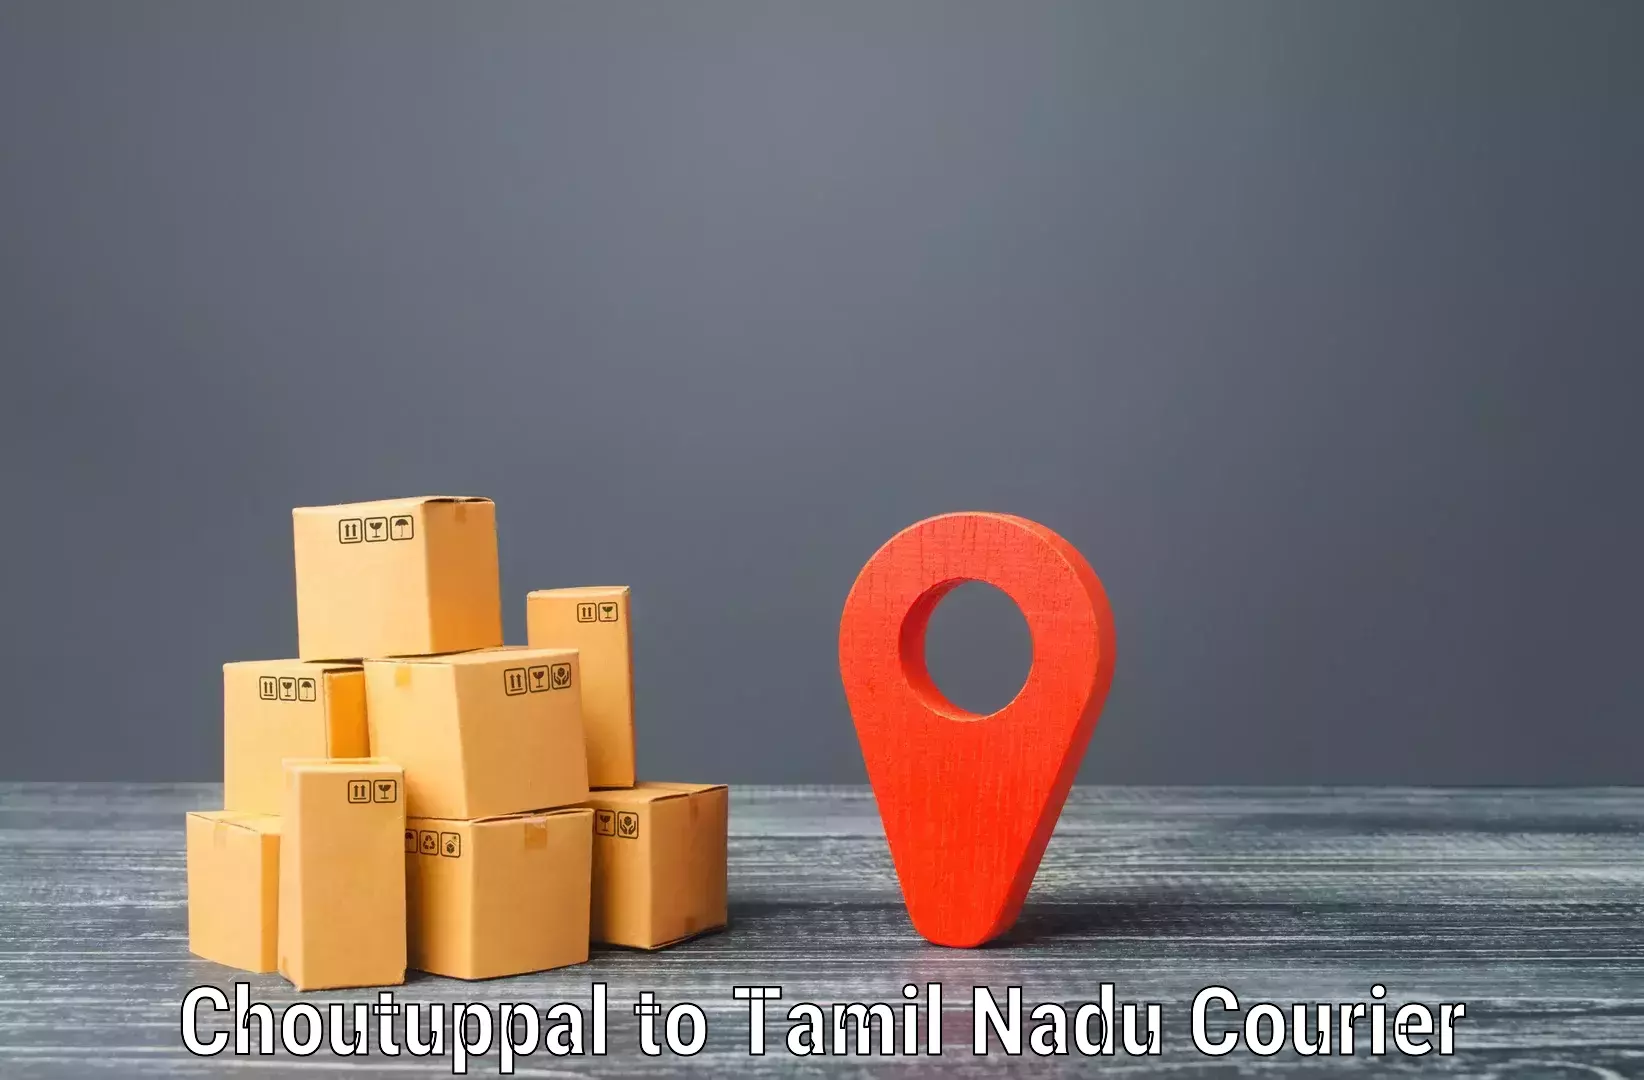 Comprehensive delivery network in Choutuppal to Vickramasingapuram